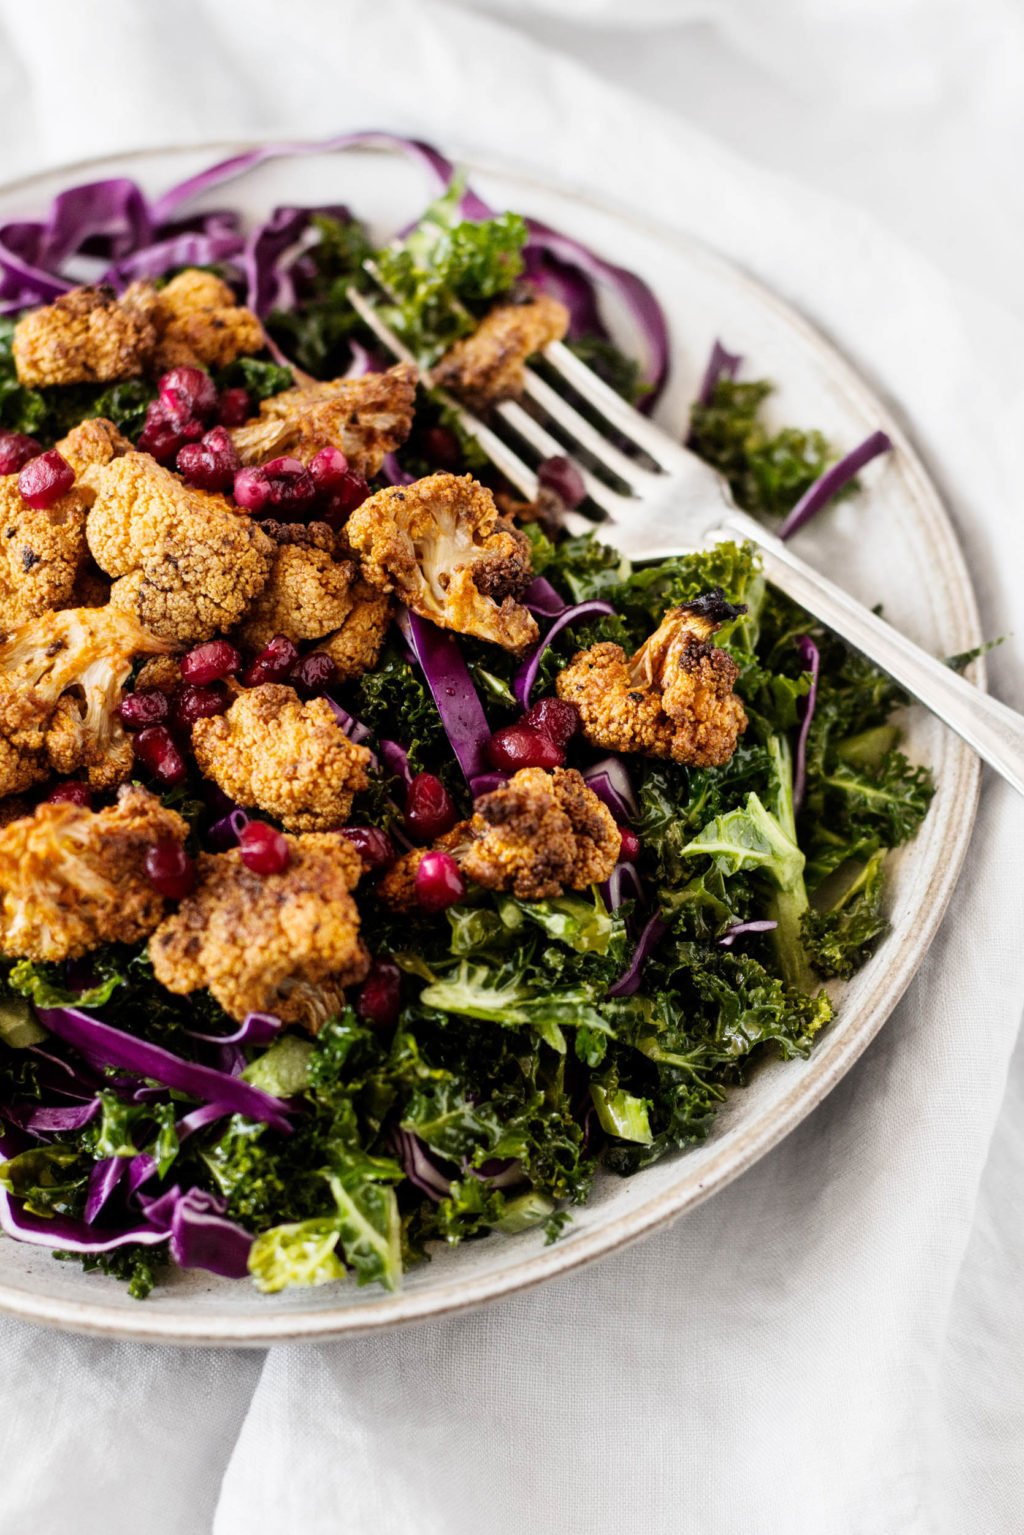 Spice roasted cauliflower florets sit on top of a bed of kale, purple cabbage, and pomegranate seeds. All part of a festive vegan holiday salad.